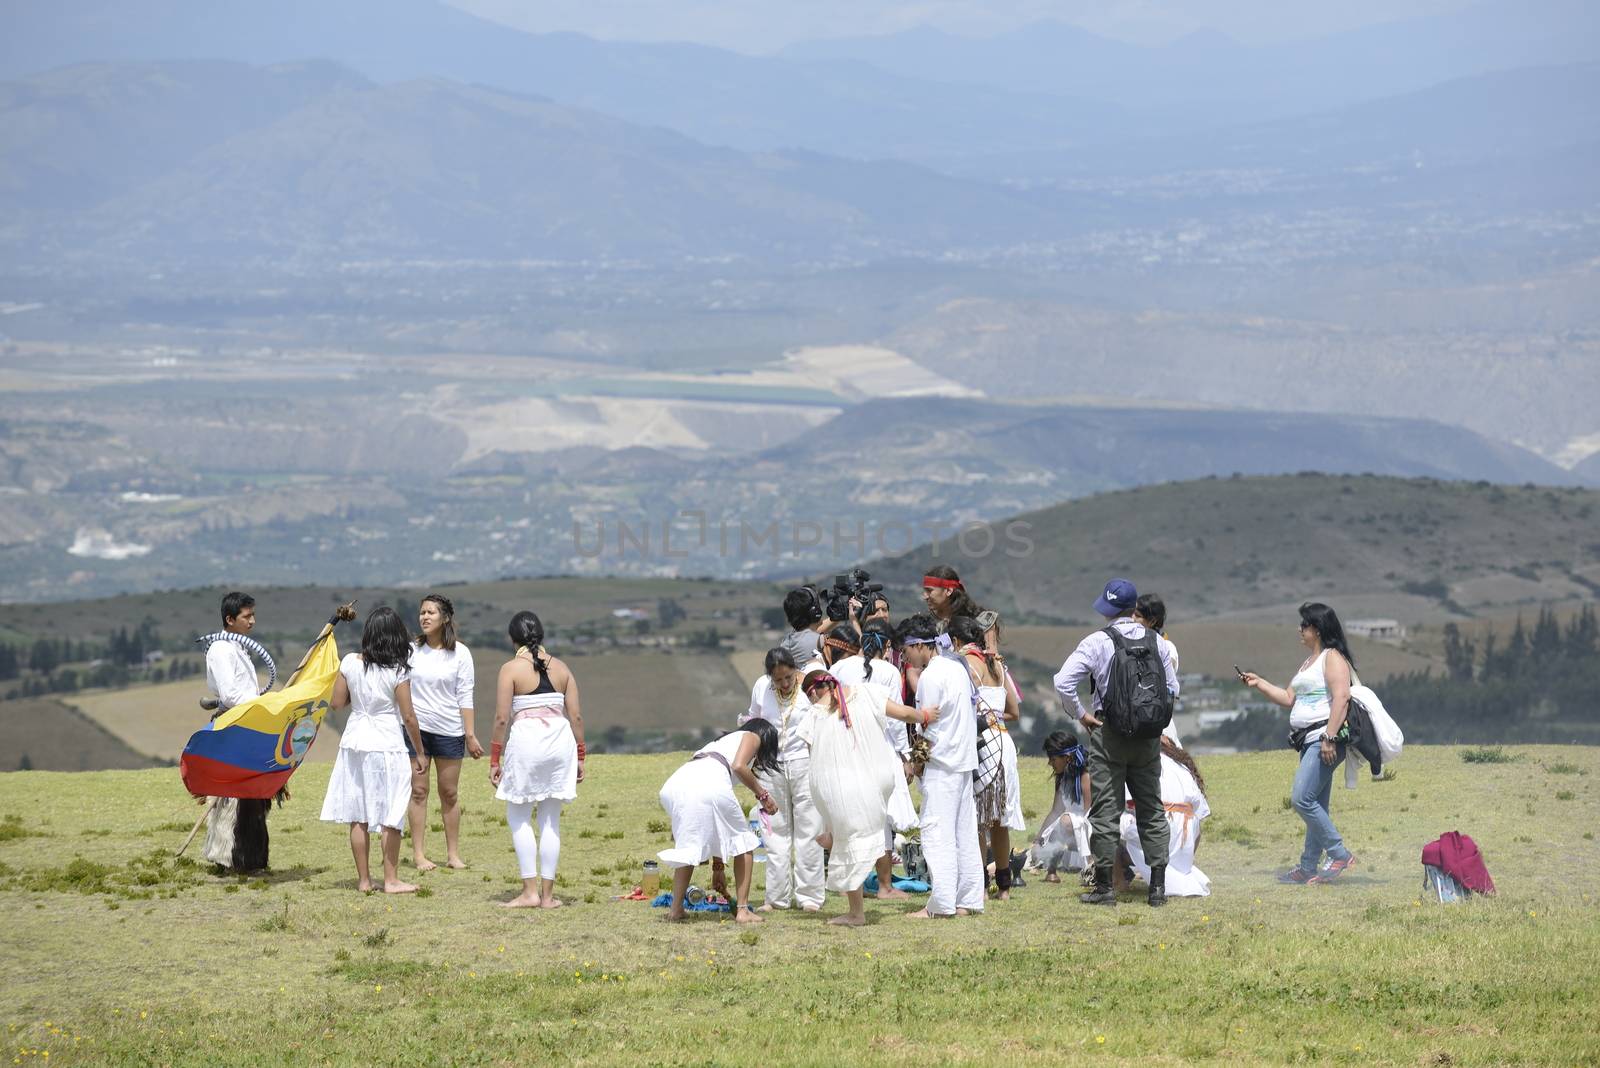 Archeological park Cochasqui, Ecuador, - June21, 2013.
The celebration of the summer solstice holiday, called Inti Raimy is held every end of the June (21-22) in the countries of Latin America like Peru and Ecuador.